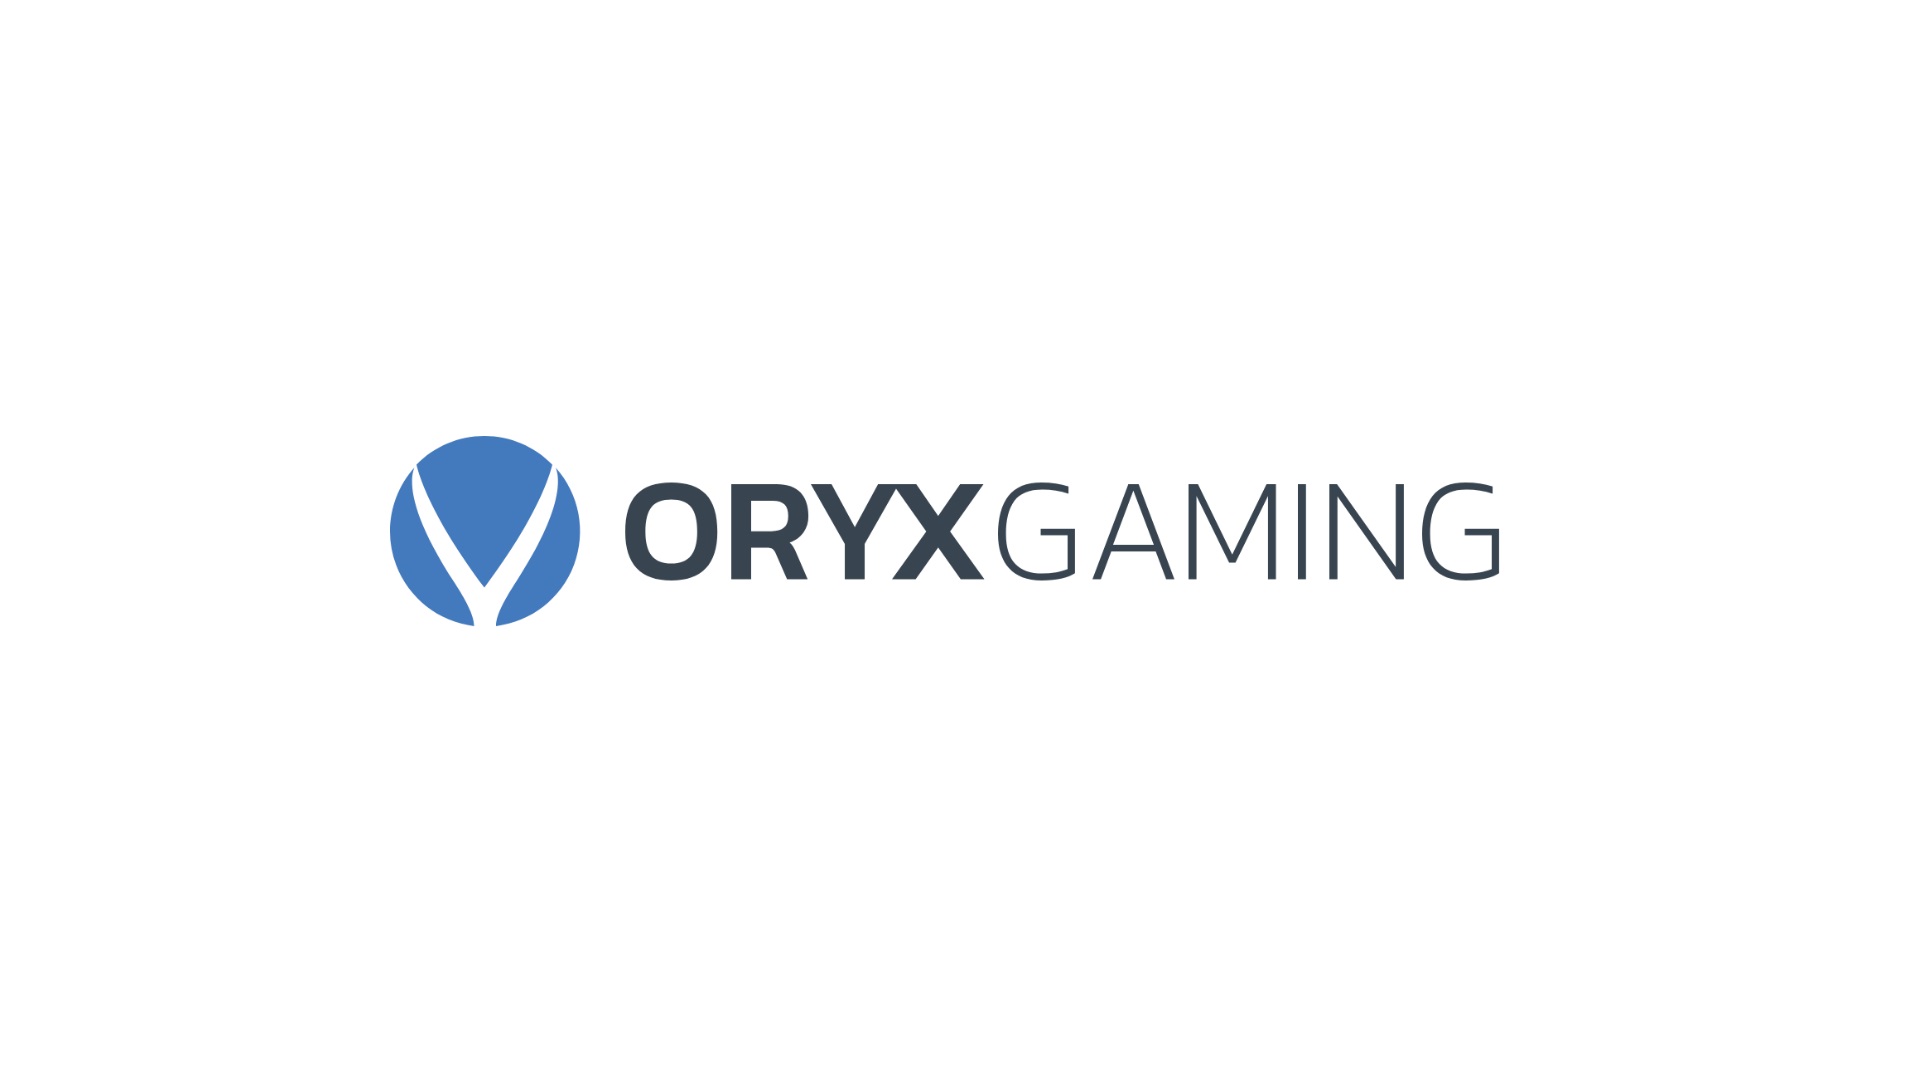 Bragg’s ORYX Gaming adds content to SkillOnNet casino brands in the UK